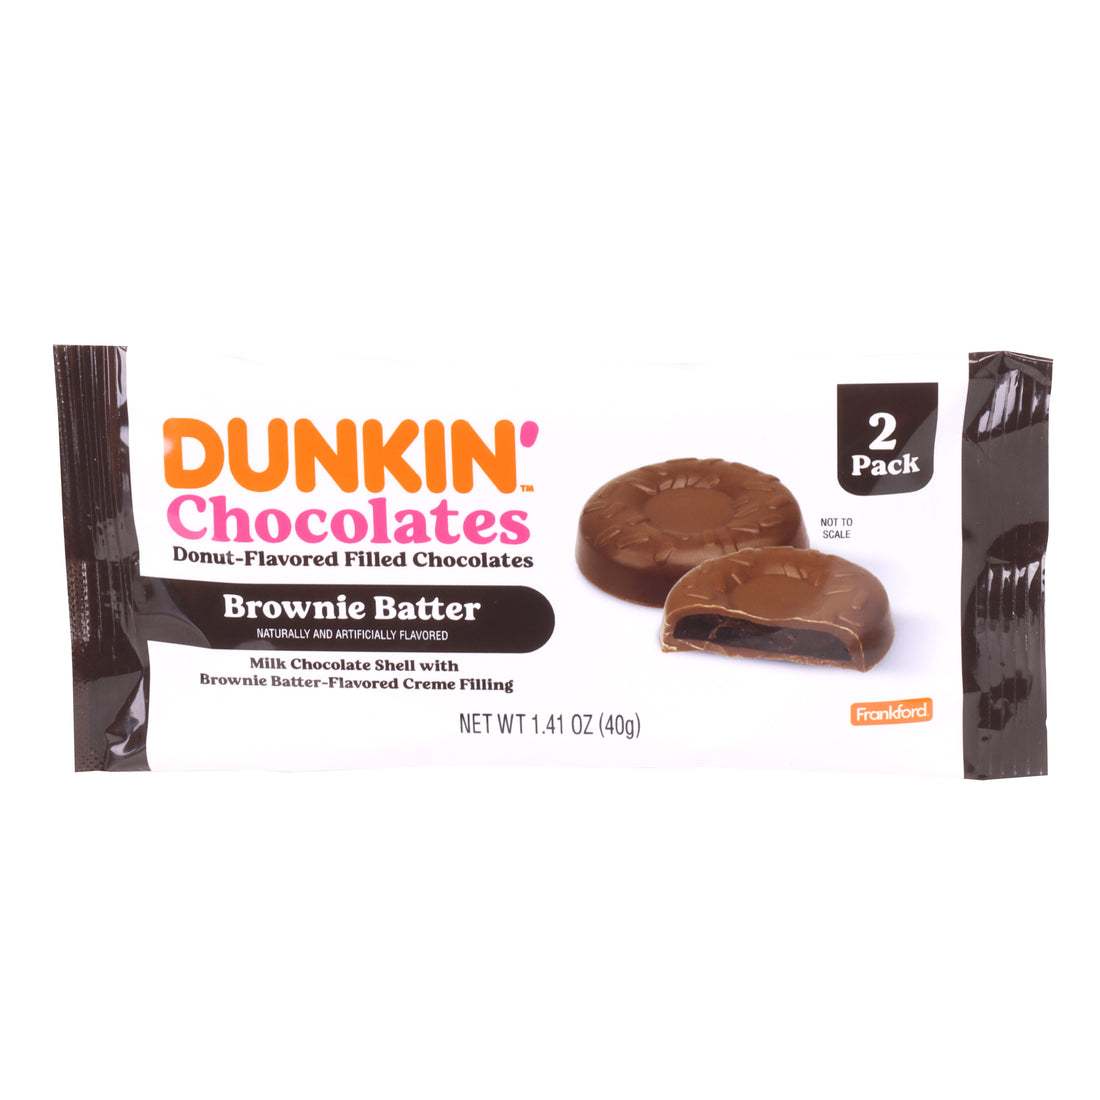 Frankford Dunkin' Brownie Batter Donut-Flavored Filled Chocolates  1.41oz - 28ct